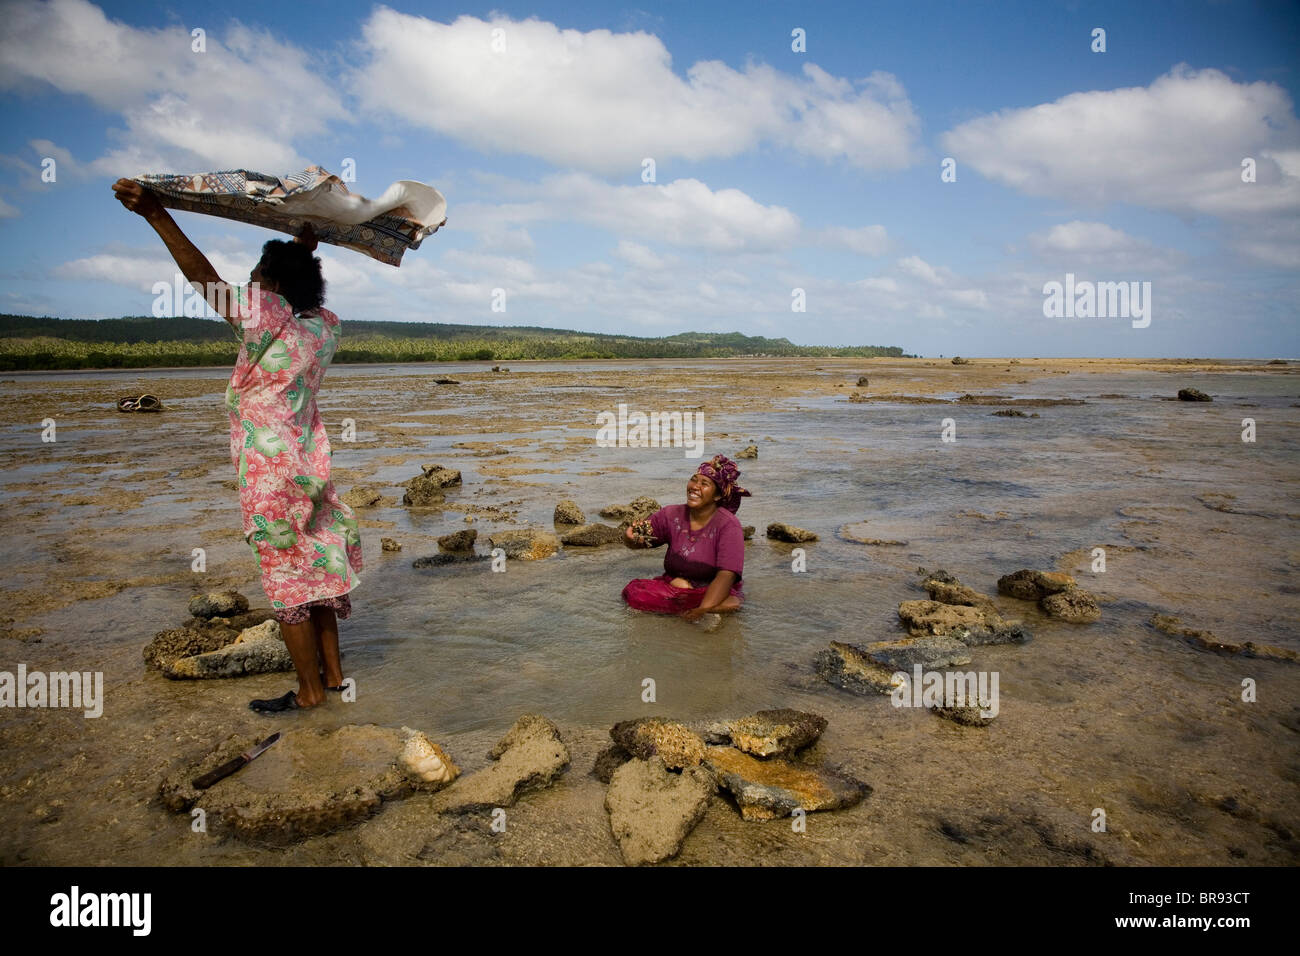 A woman dries her scarf while waiting for the tide to recede. Stock Photo